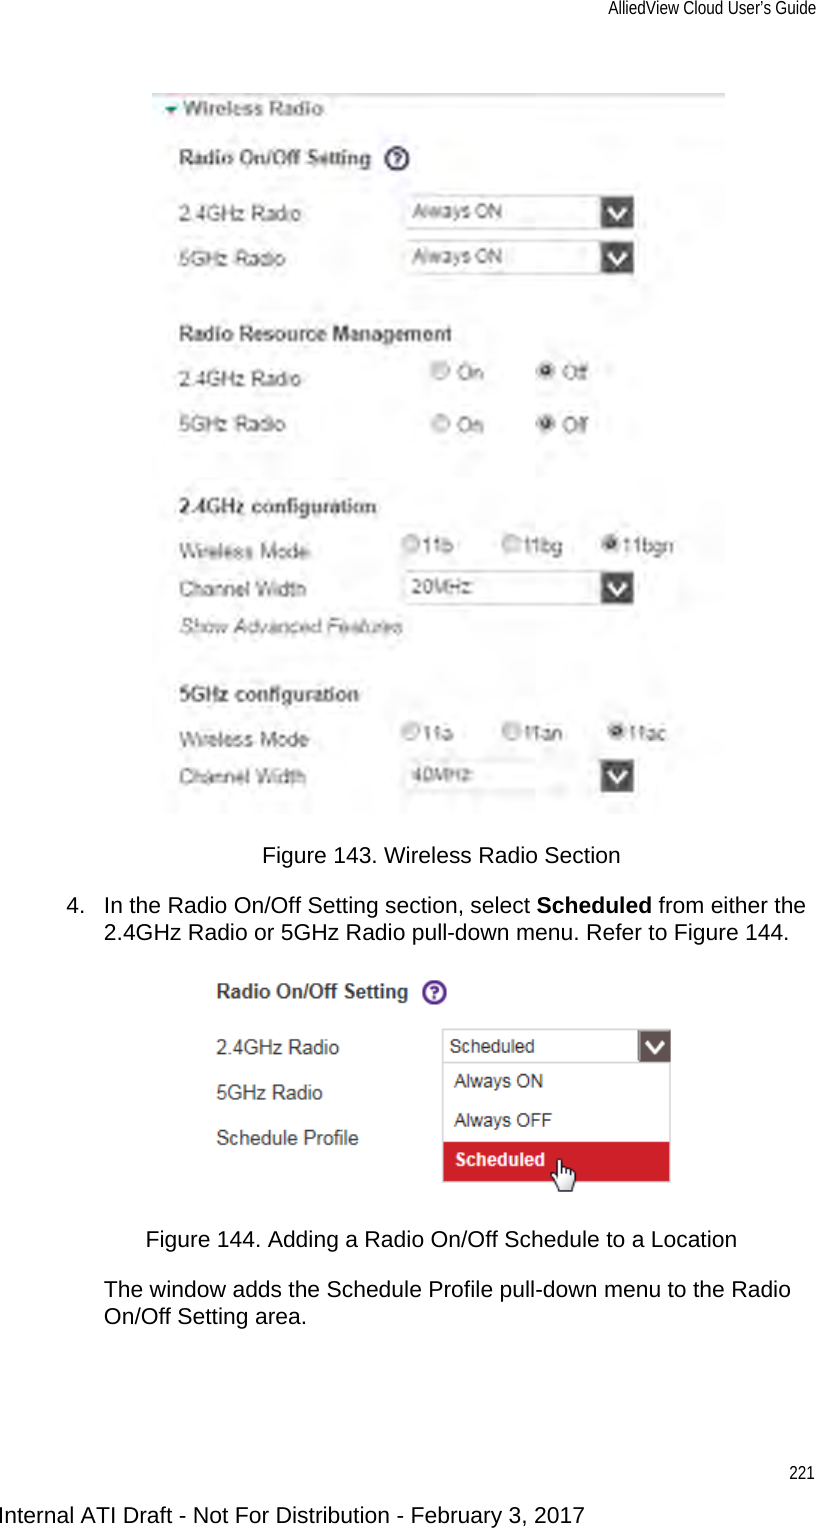 AlliedView Cloud User’s Guide221Figure 143. Wireless Radio Section4. In the Radio On/Off Setting section, select Scheduled from either the 2.4GHz Radio or 5GHz Radio pull-down menu. Refer to Figure 144.Figure 144. Adding a Radio On/Off Schedule to a LocationThe window adds the Schedule Profile pull-down menu to the Radio On/Off Setting area.Internal ATI Draft - Not For Distribution - February 3, 2017